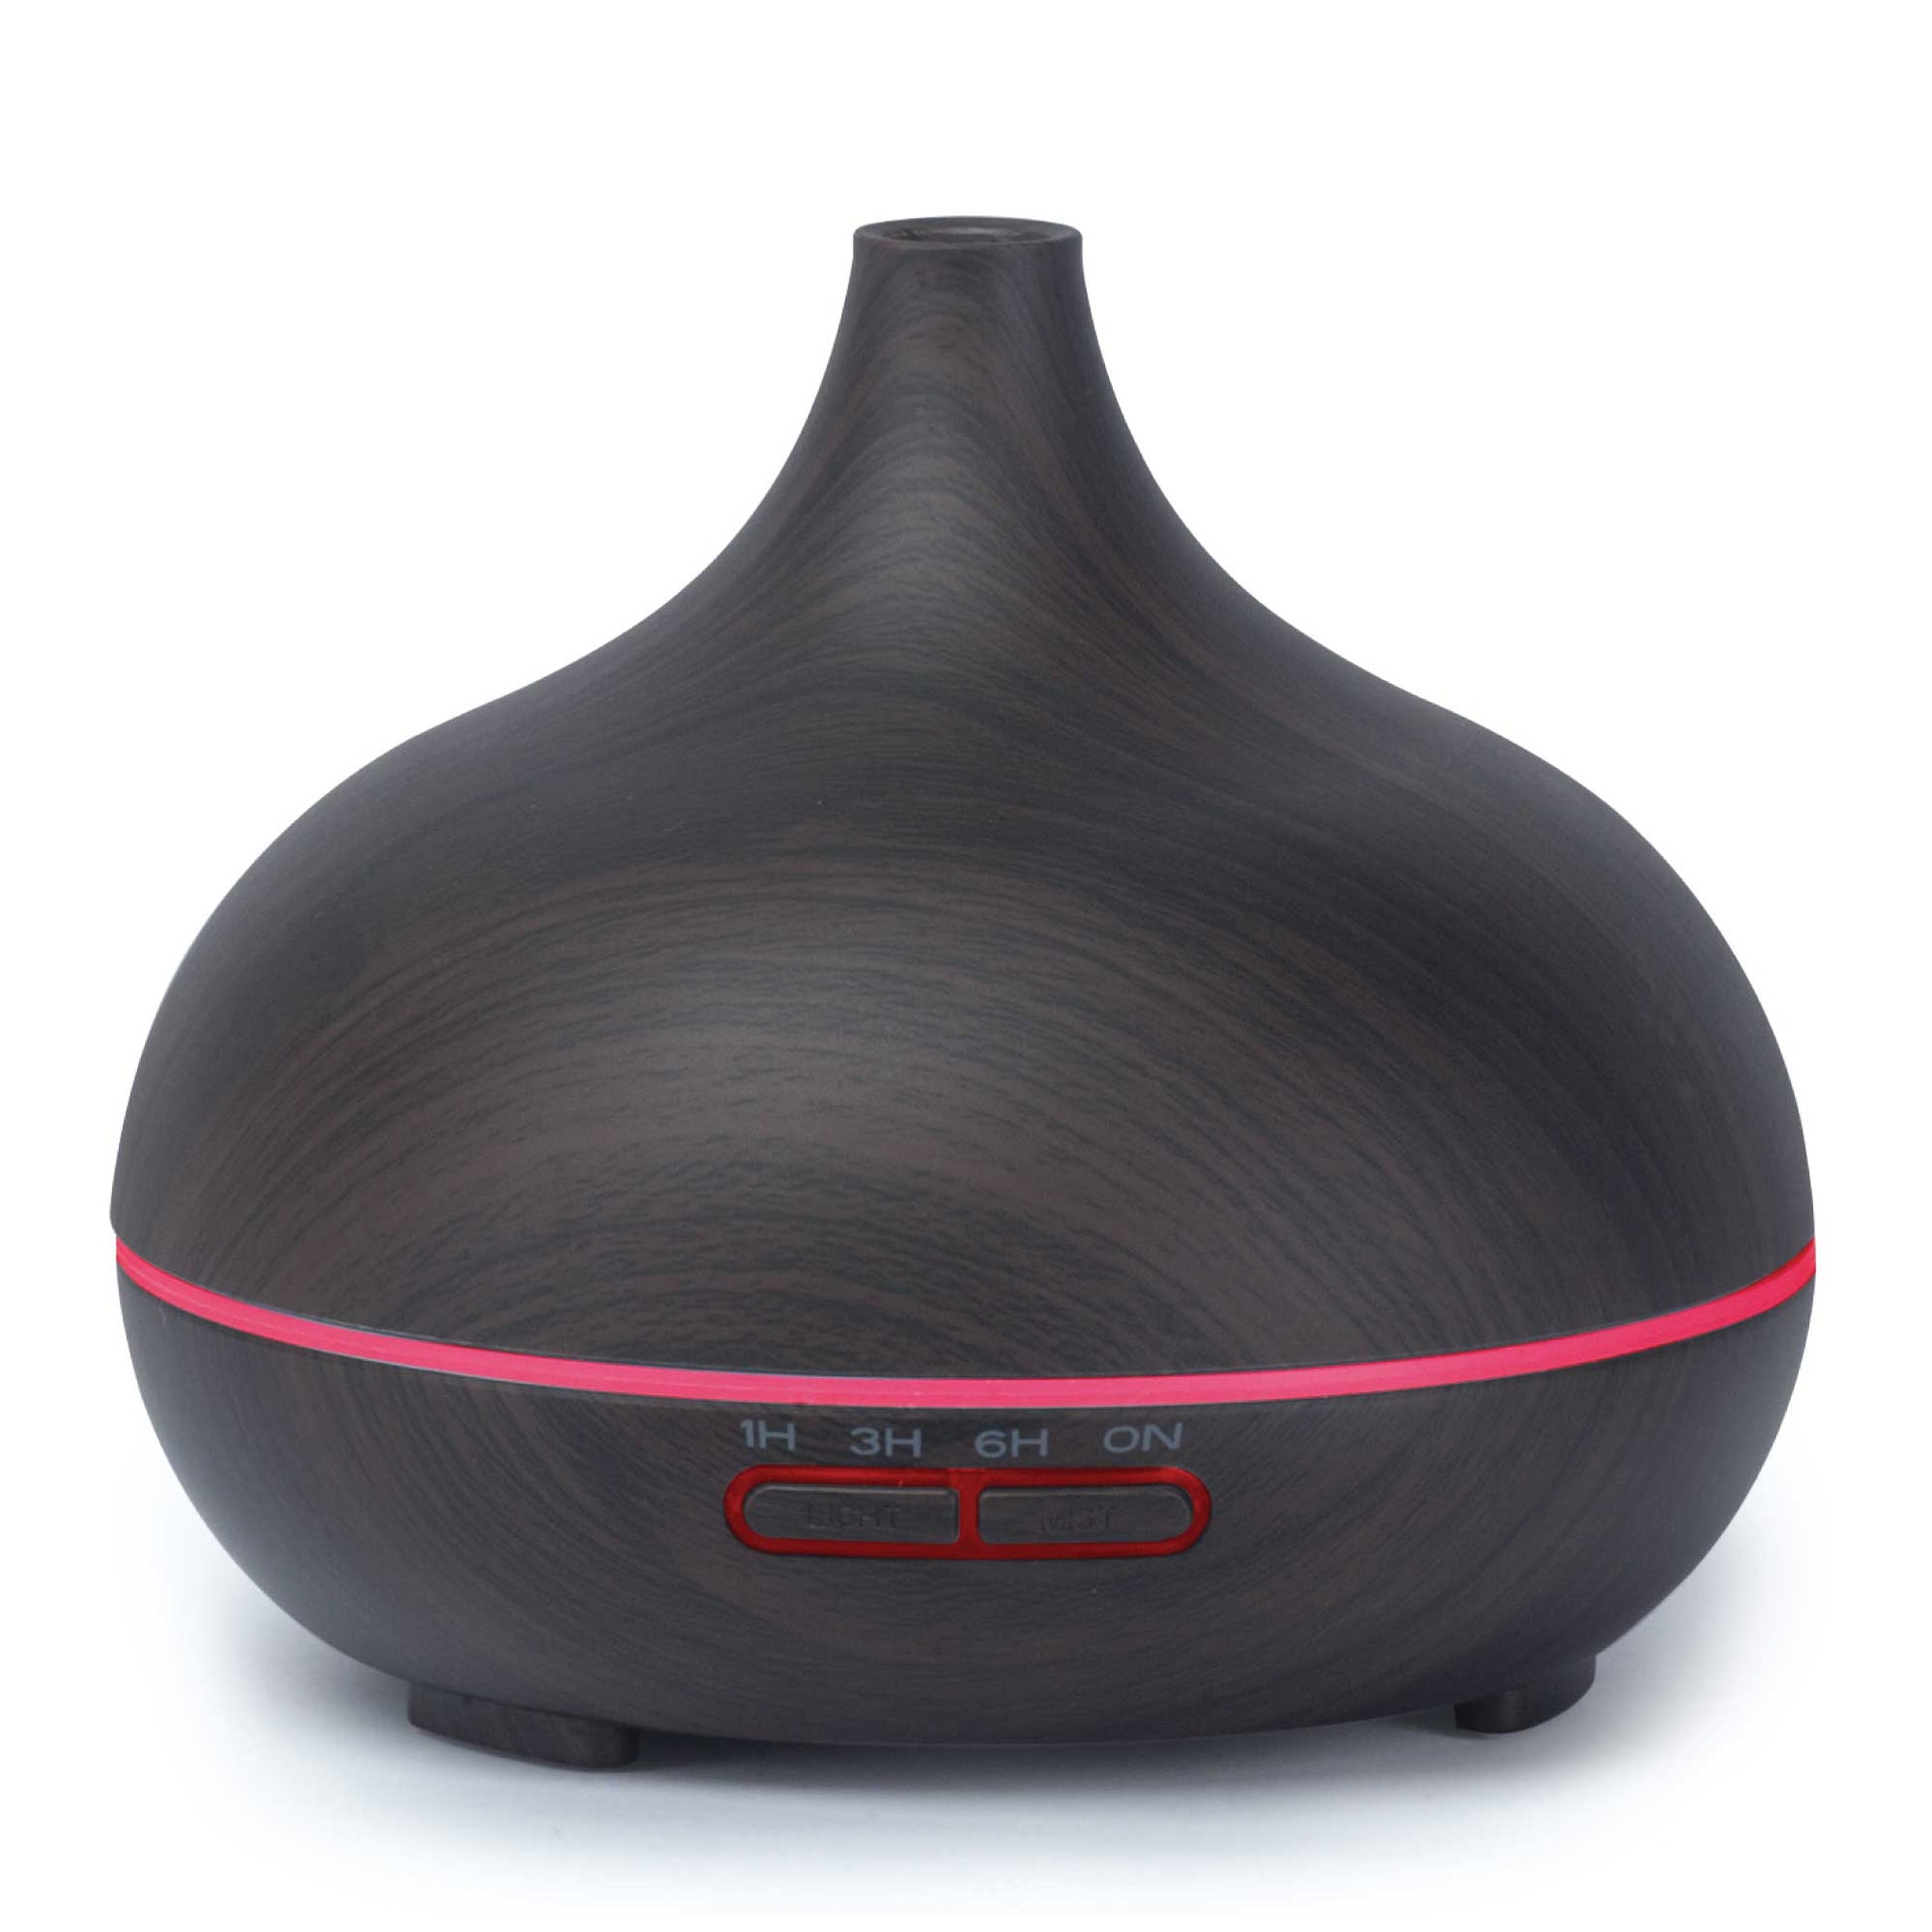 500ml Essential Oil Aroma Diffuser - Electric Aromatherapy Mist Humidifier